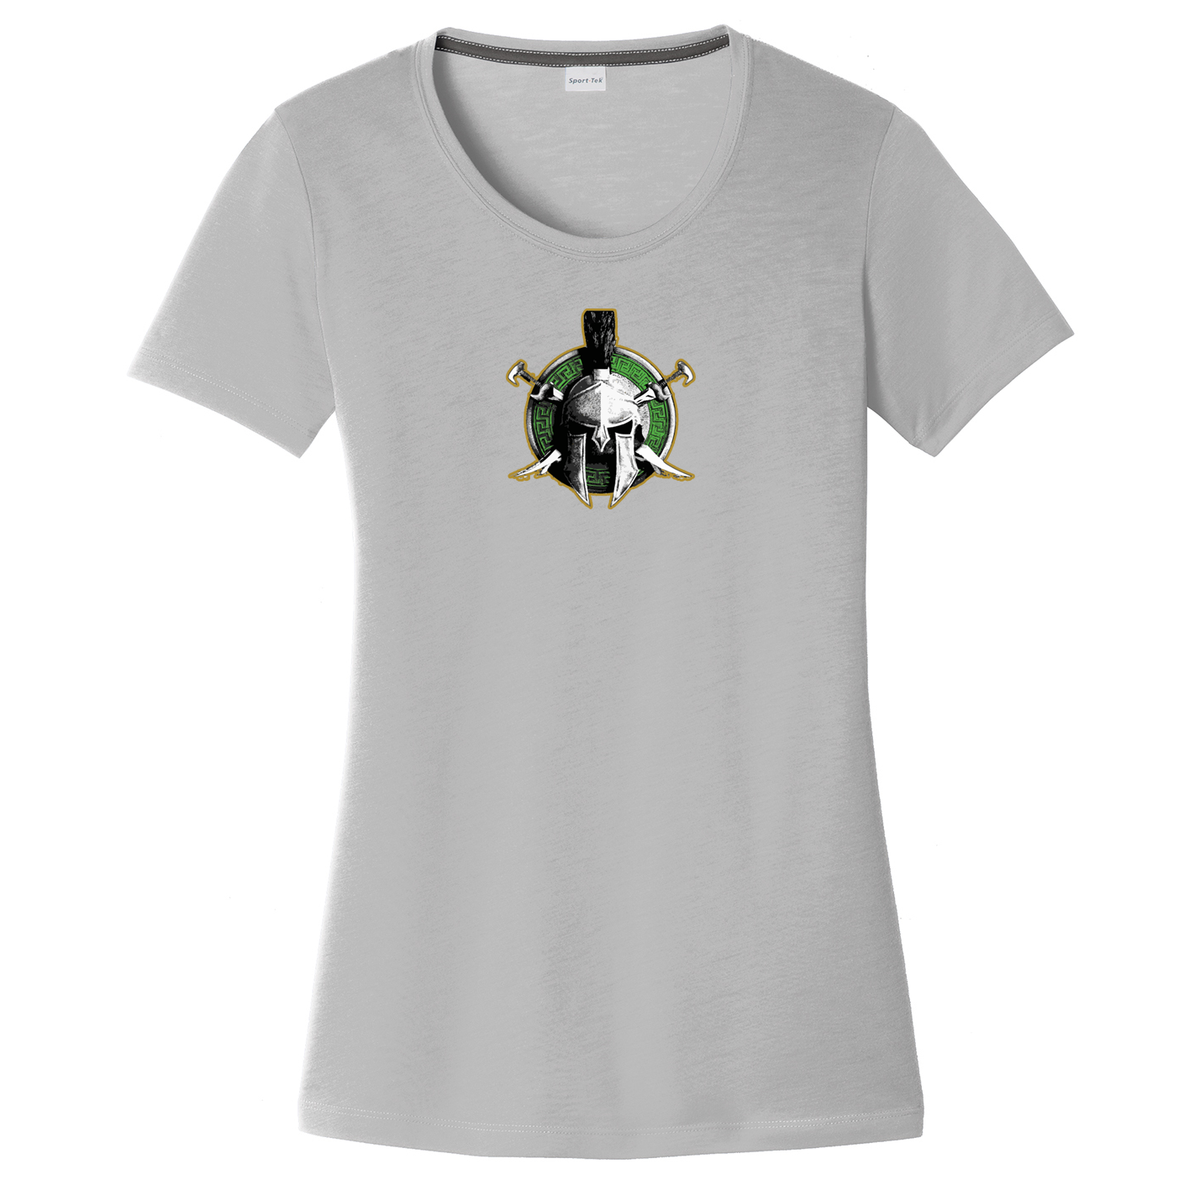 Salinas Valley Spartans Women's CottonTouch Performance T-Shirt